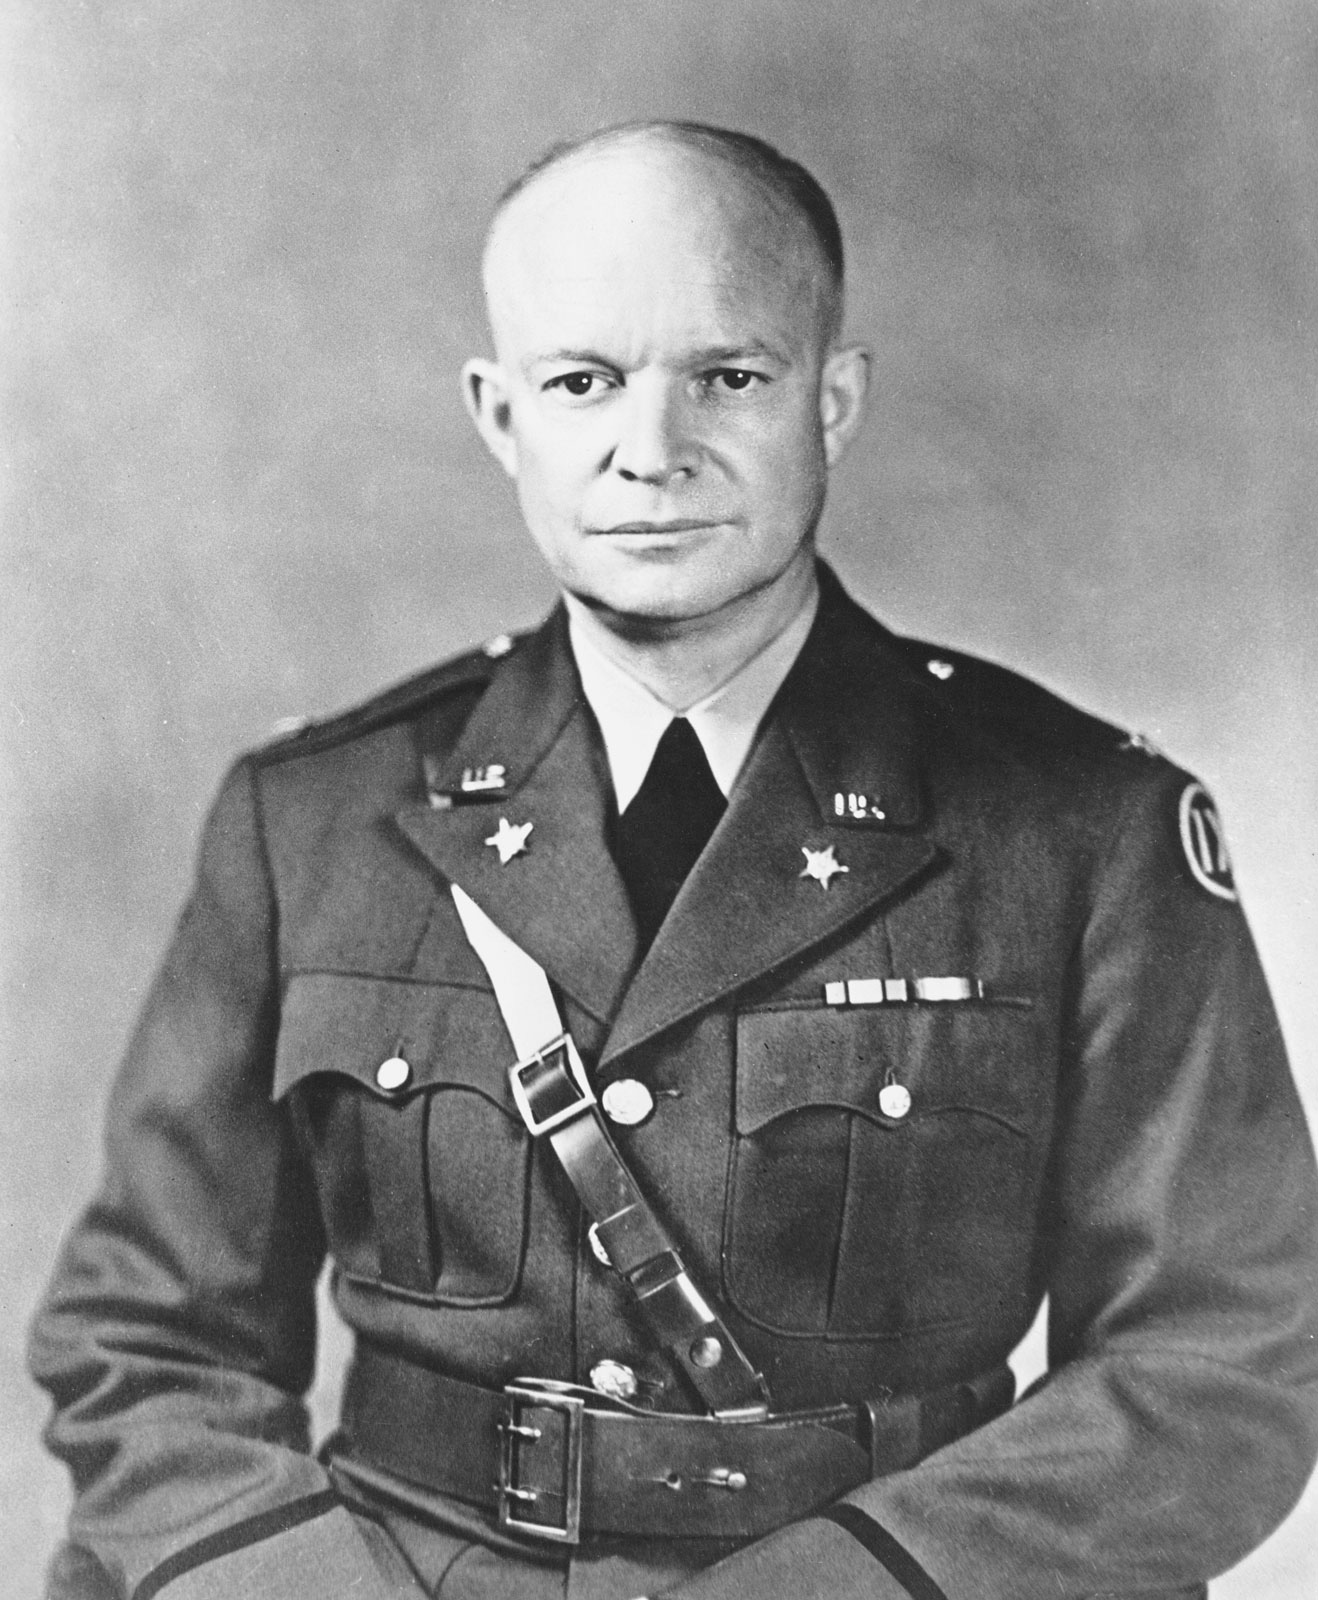 World War II: General Dwight D. Eisenhower publicly announces the Allied armistice with Italy